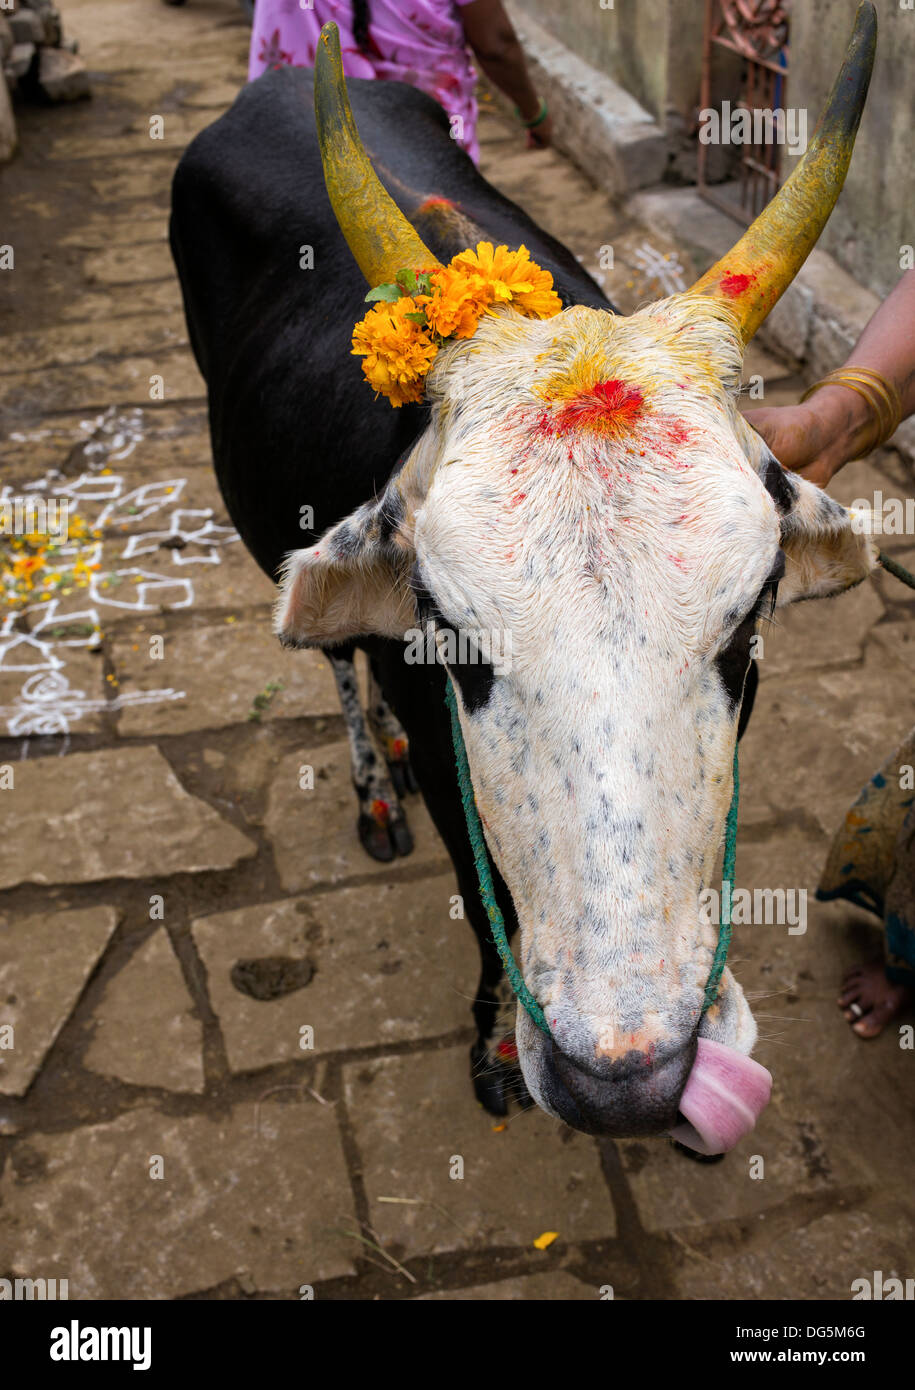 Indian cow adorned in kum kum and turmeric powder at festival time in a rural Indian village. Andhra Pradesh, India Stock Photo